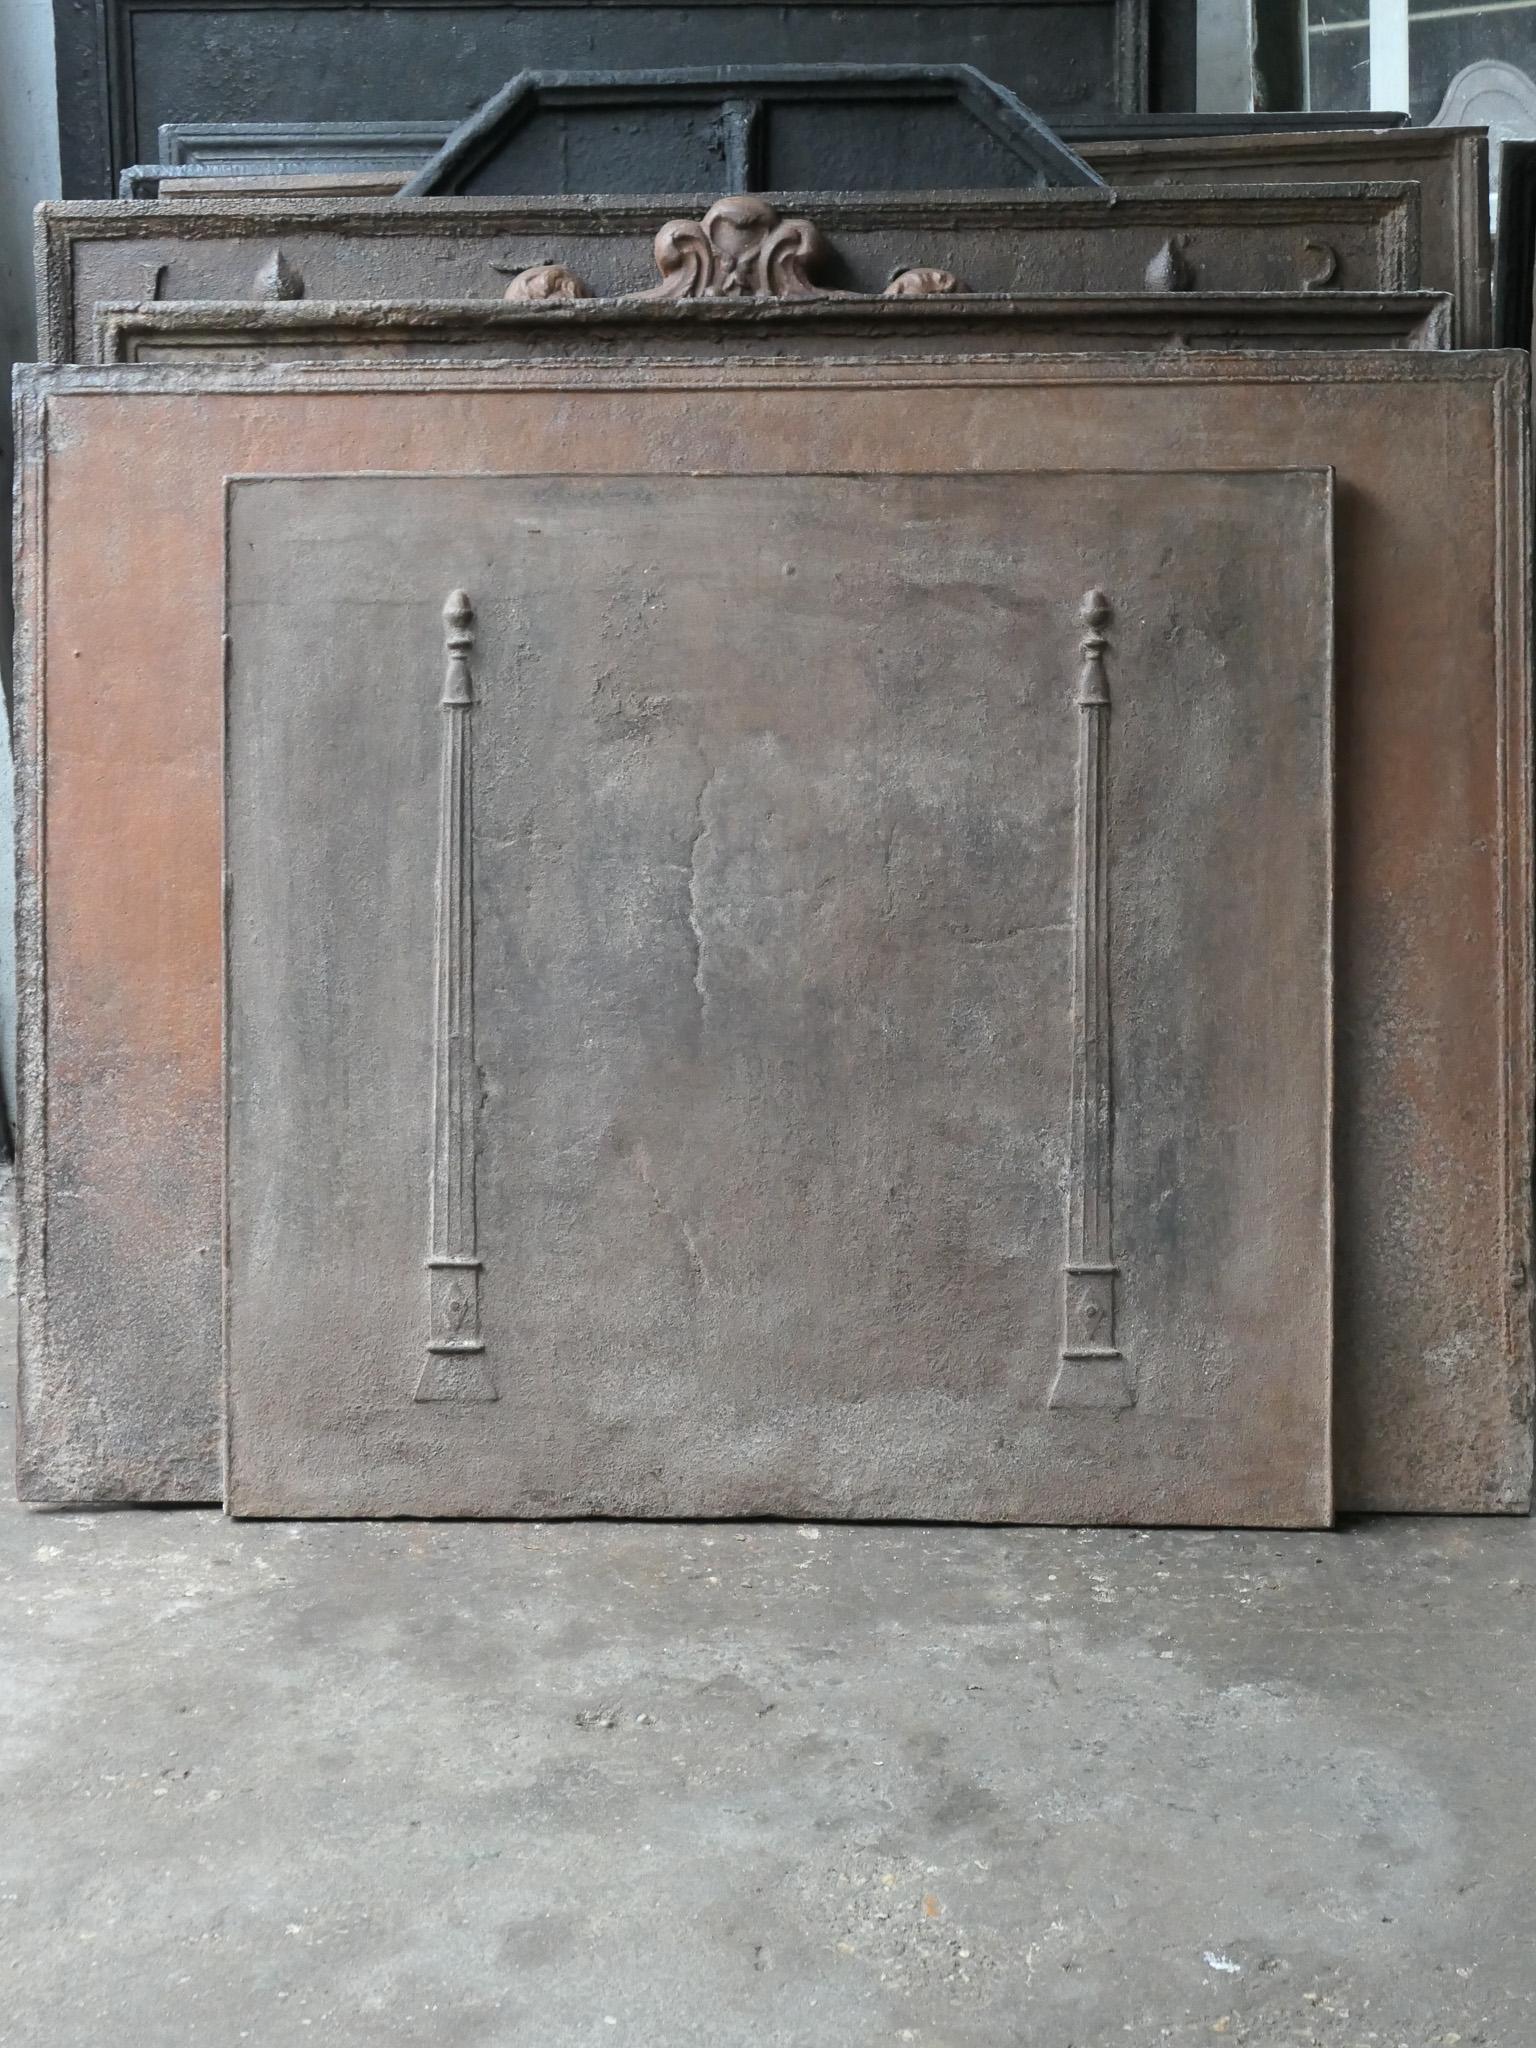 18th - 19th century French neoclassical fireback with two pillars of freedom. The pillars symbolize the value liberty, one of the three values of the French revolution. 

The fireback is made of cast iron and has a natural brown patina. Upon